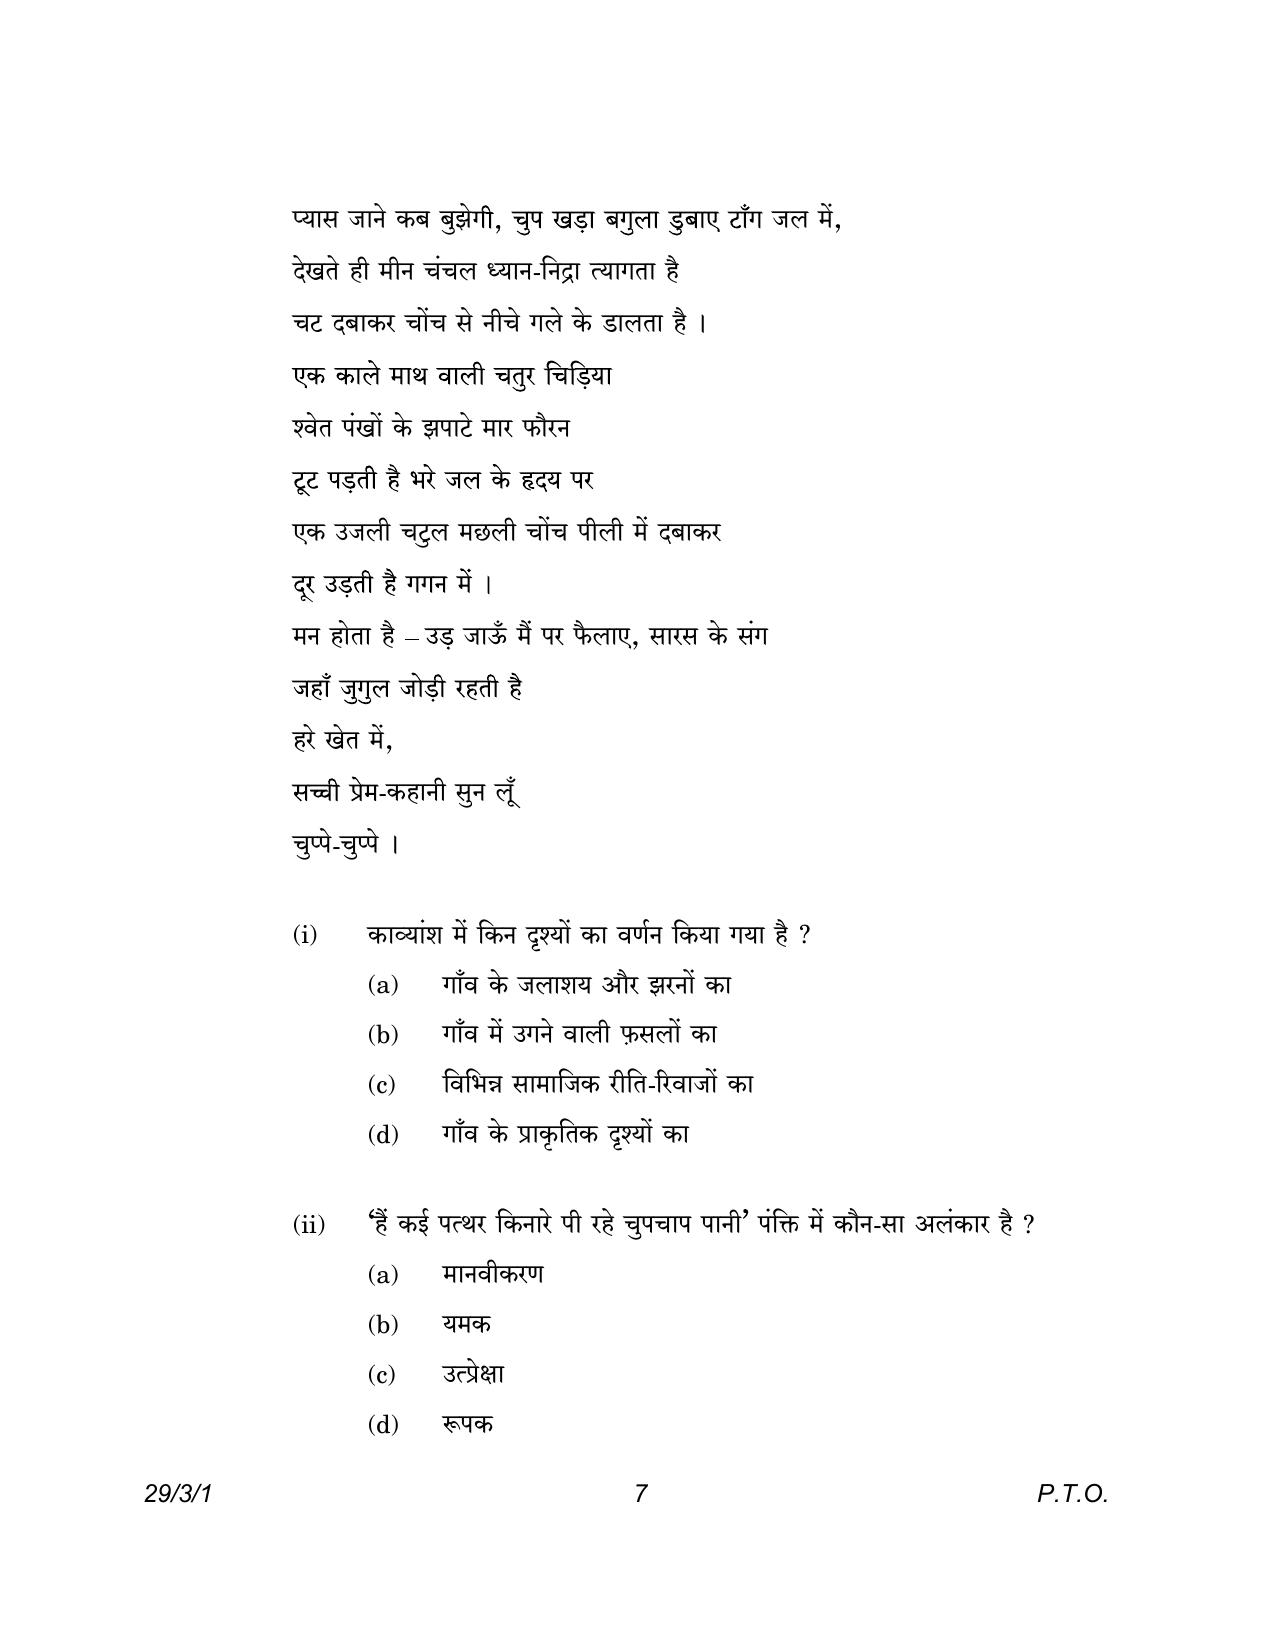 CBSE Class 12 29-3-1 Hindi Elective 2023 Question Paper - Page 7